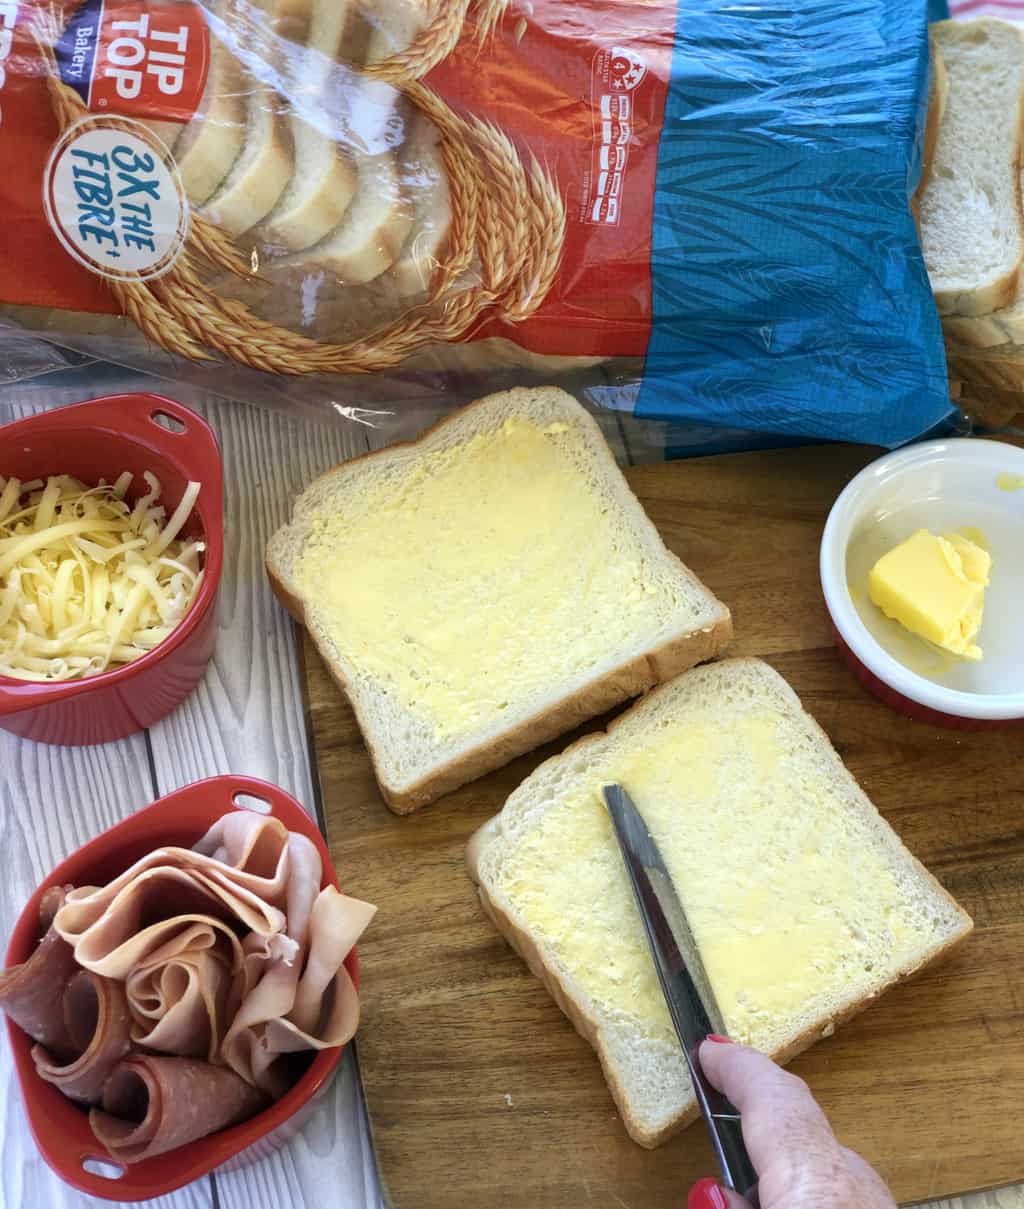 Preparing toasted sandwiches by spreading the butter 